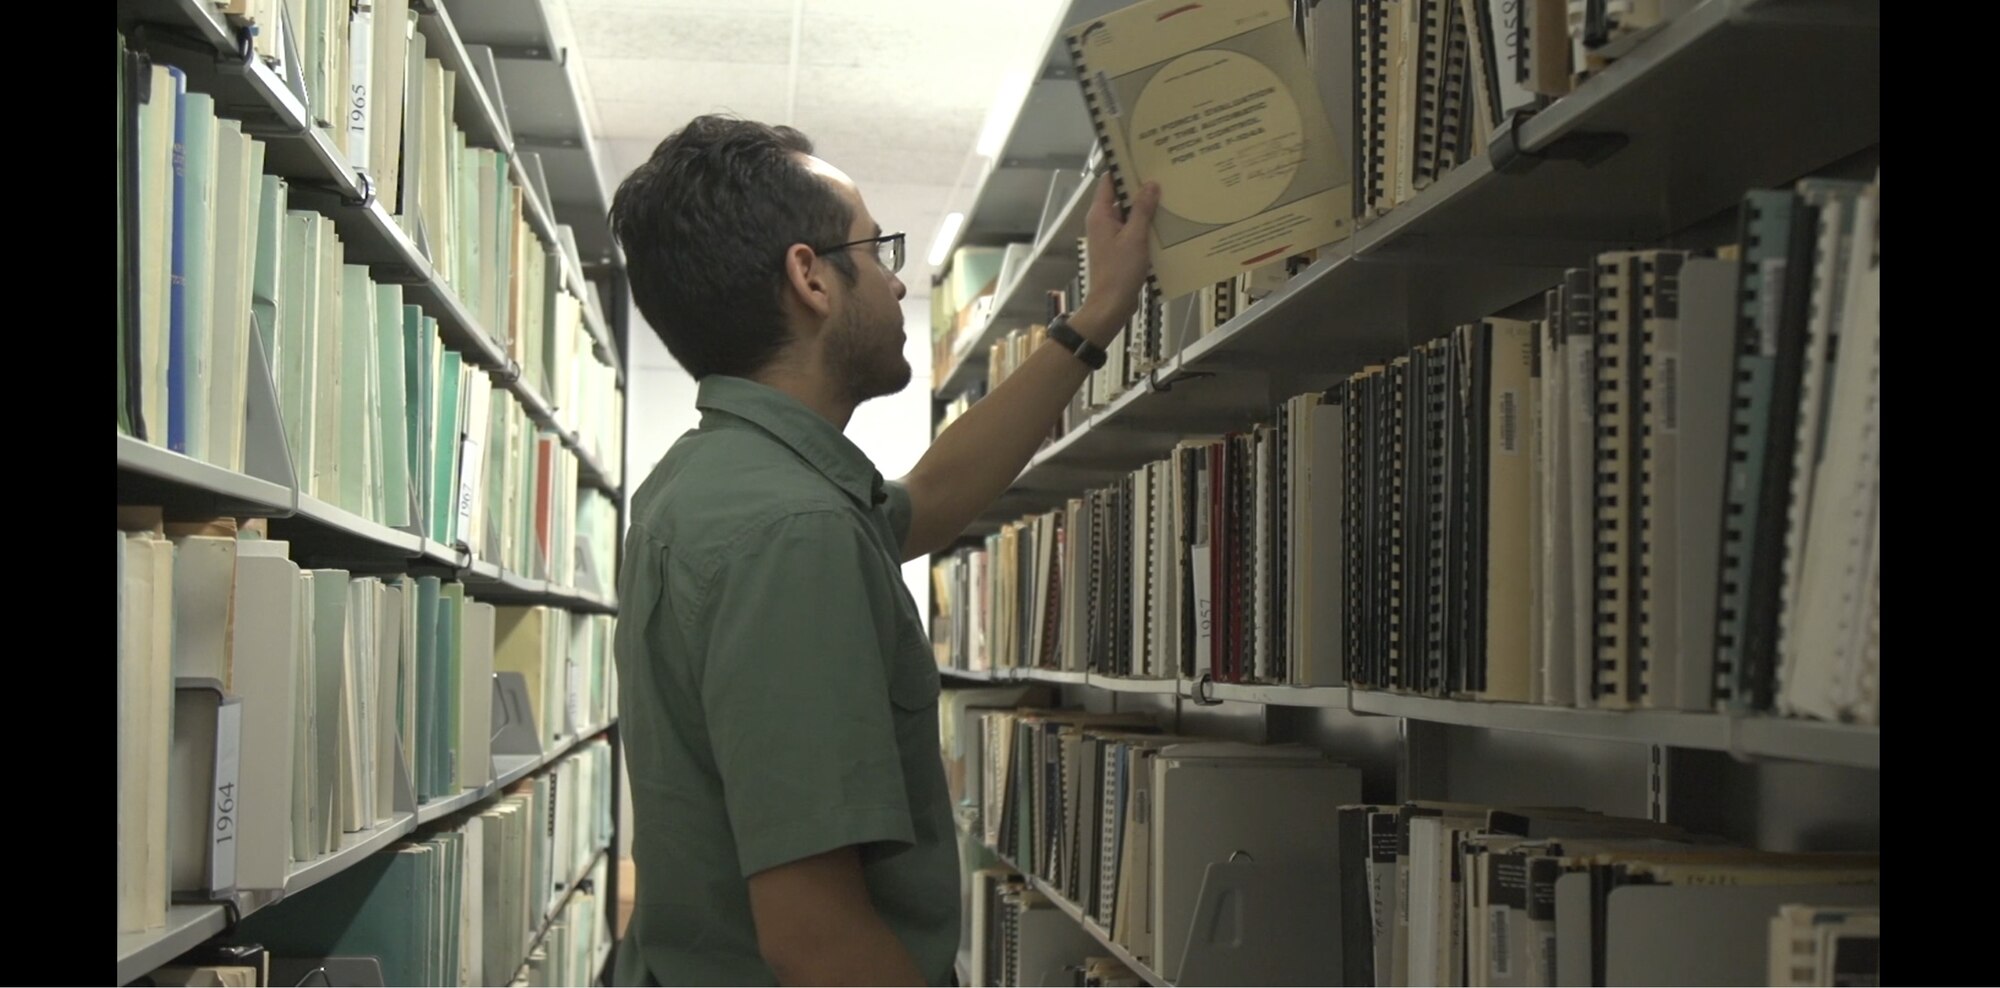 An Edwards Air Force Base engineer consults a Technical Report in the 812th Test Support Squadron archives. The Scientific and Technical Information Program Distribution Statements identify who may view the contents of a report and are prominently displayed on the front cover. (Courtesy photo)